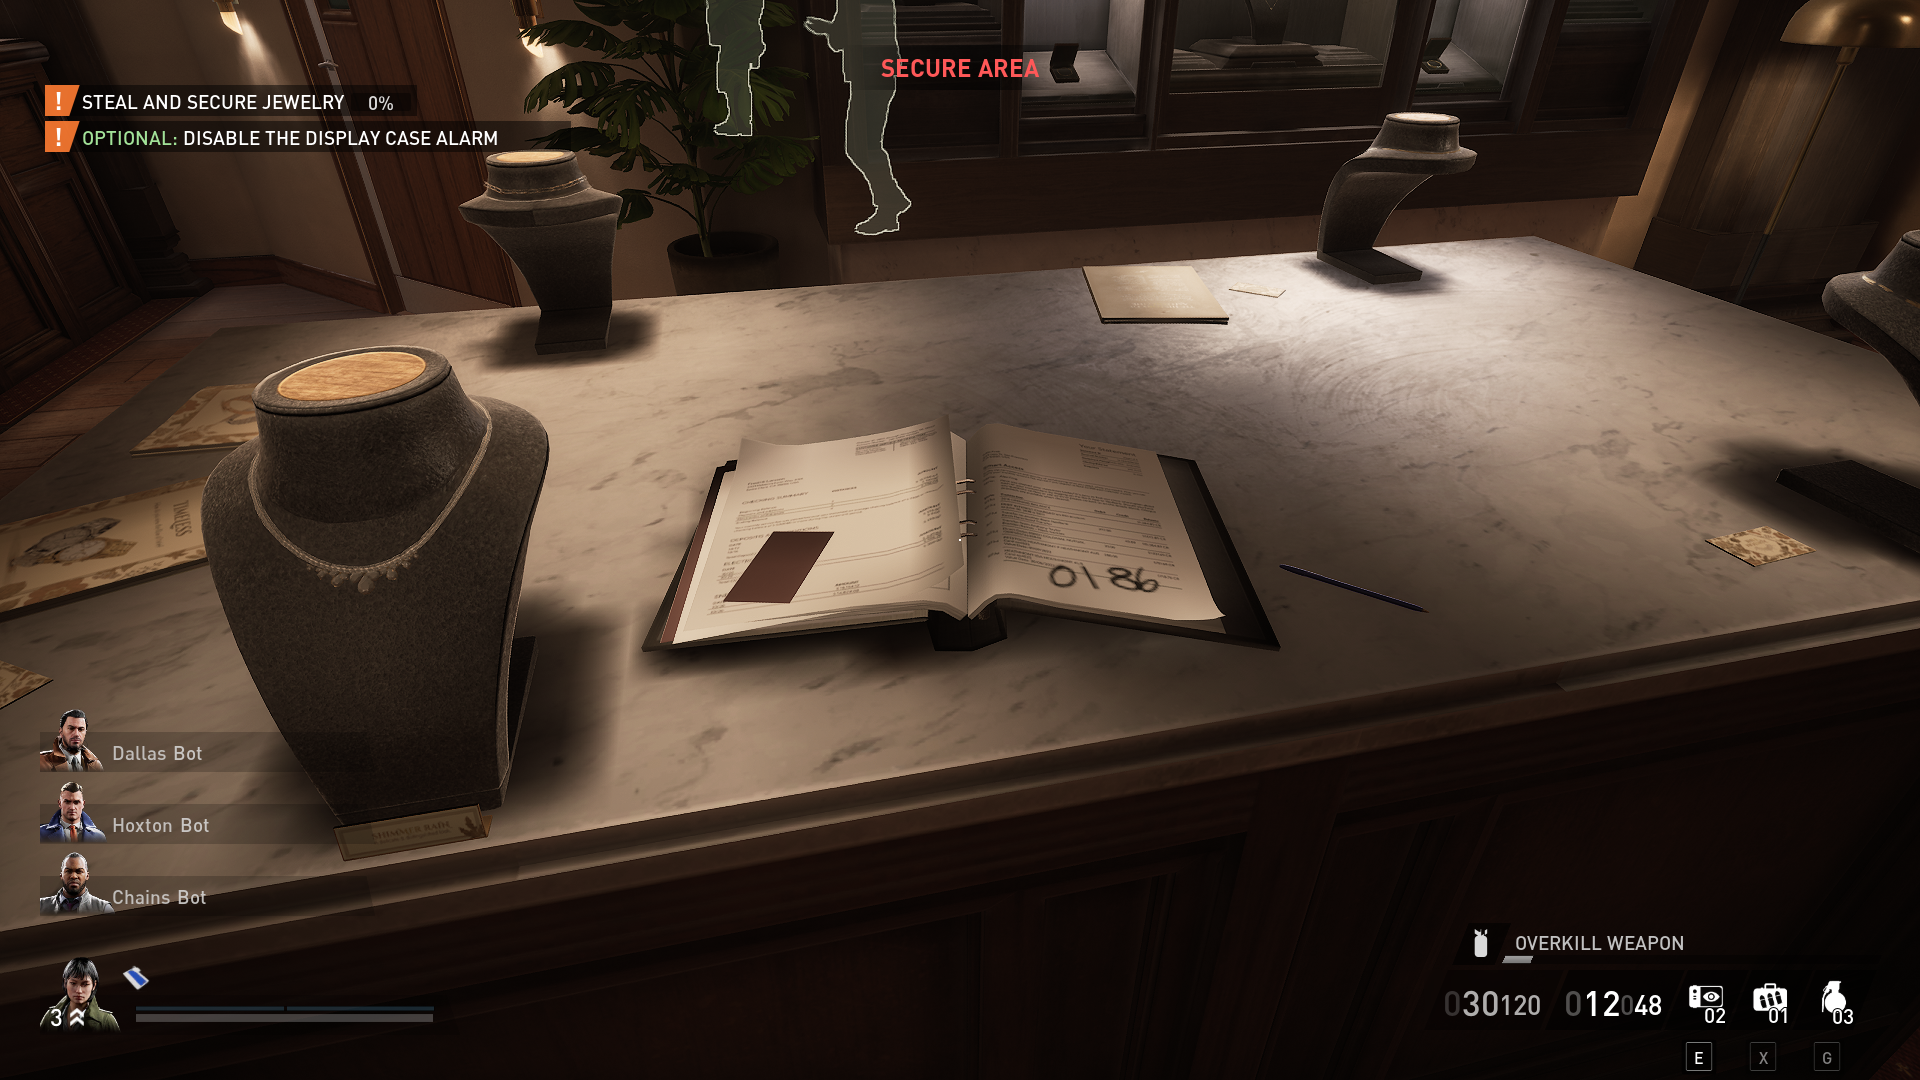 Displays the ledger in the VIP showroom during Dirty Ice (Payday 3)